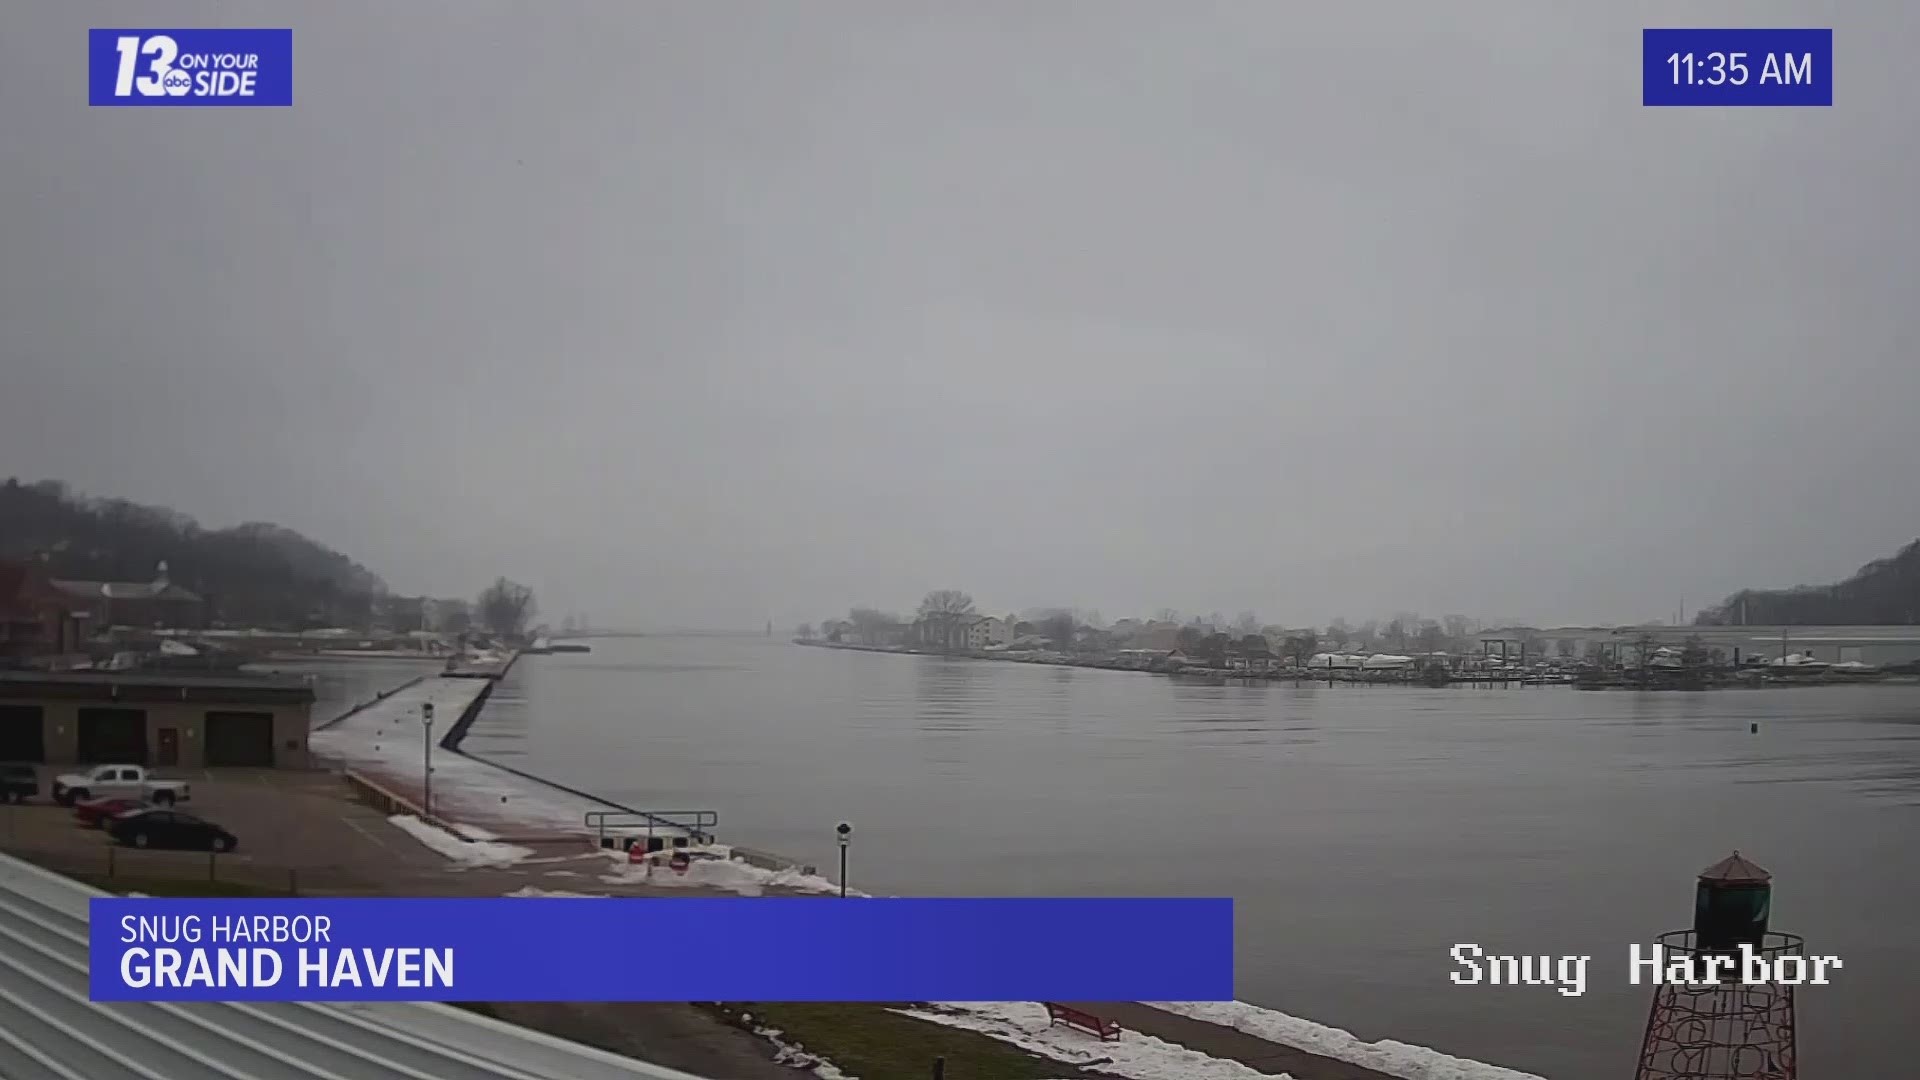 Another gray day goes by in Grand Haven from the Snug Harbor web camera.